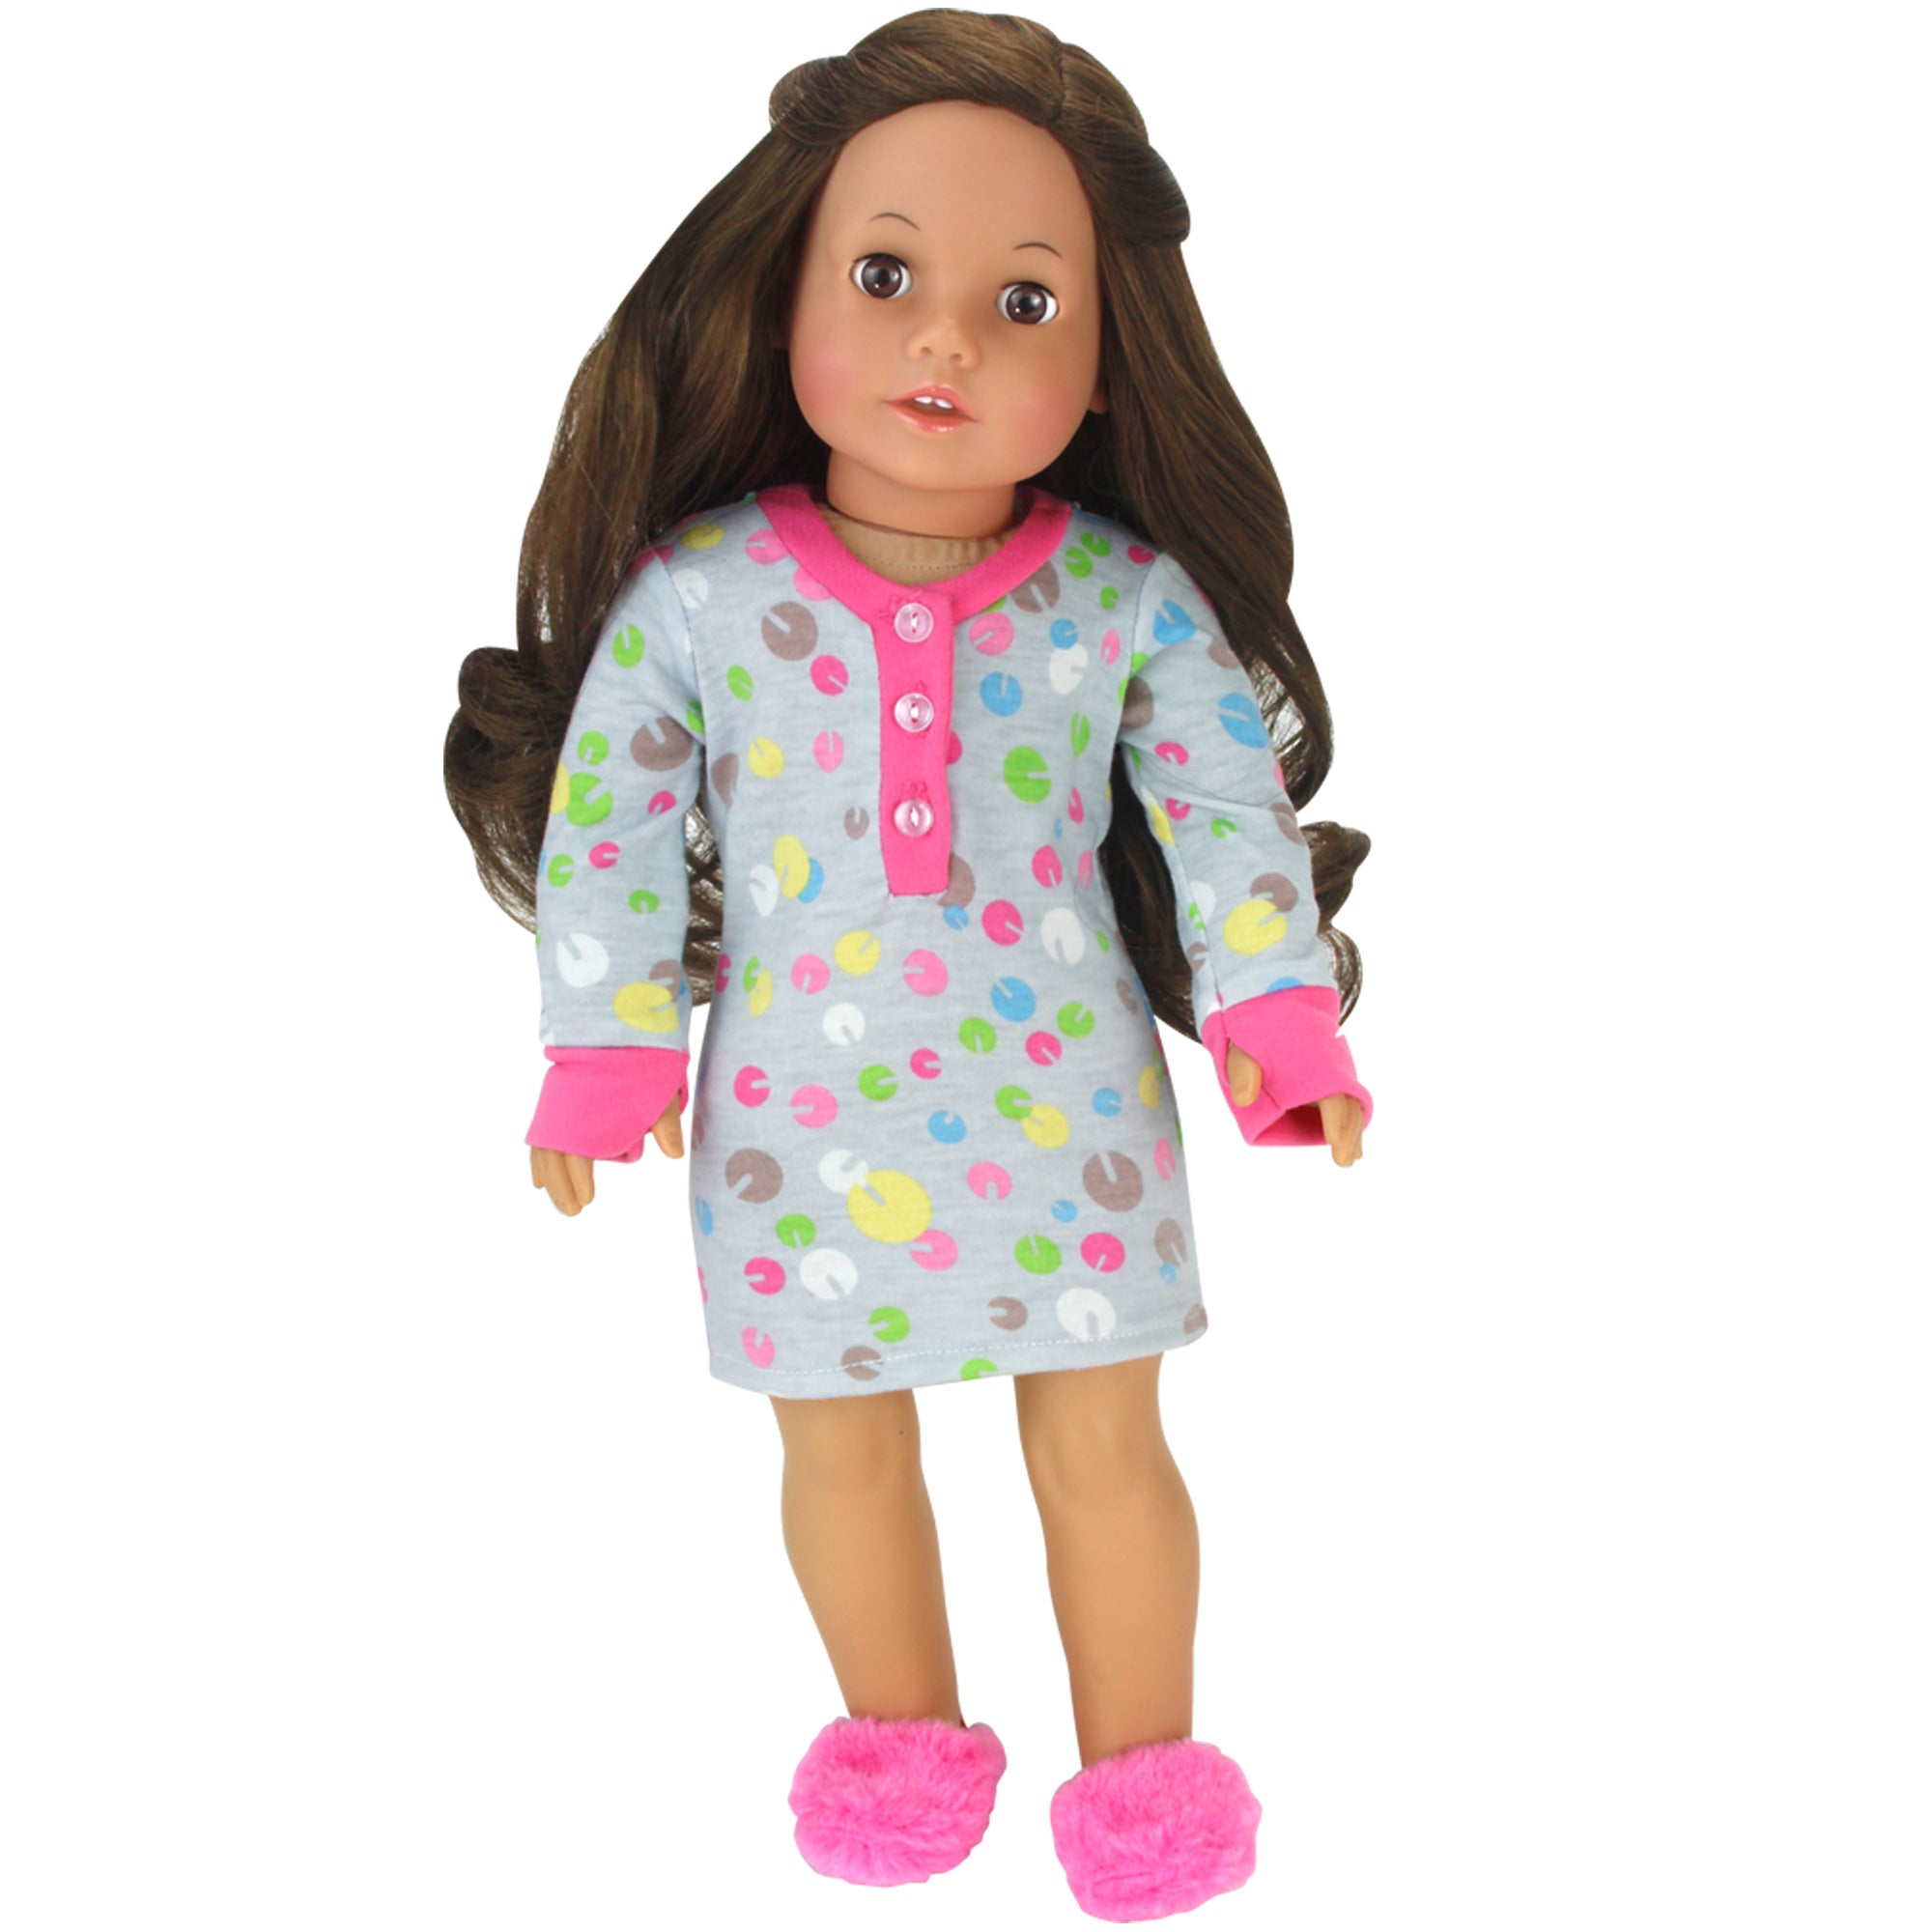 Sophia’s Long-Sleeved Print Nightgown Sleep Shirt & Fluffy Slippers Pajama Outfit for 18” Dolls, Gray/Pink